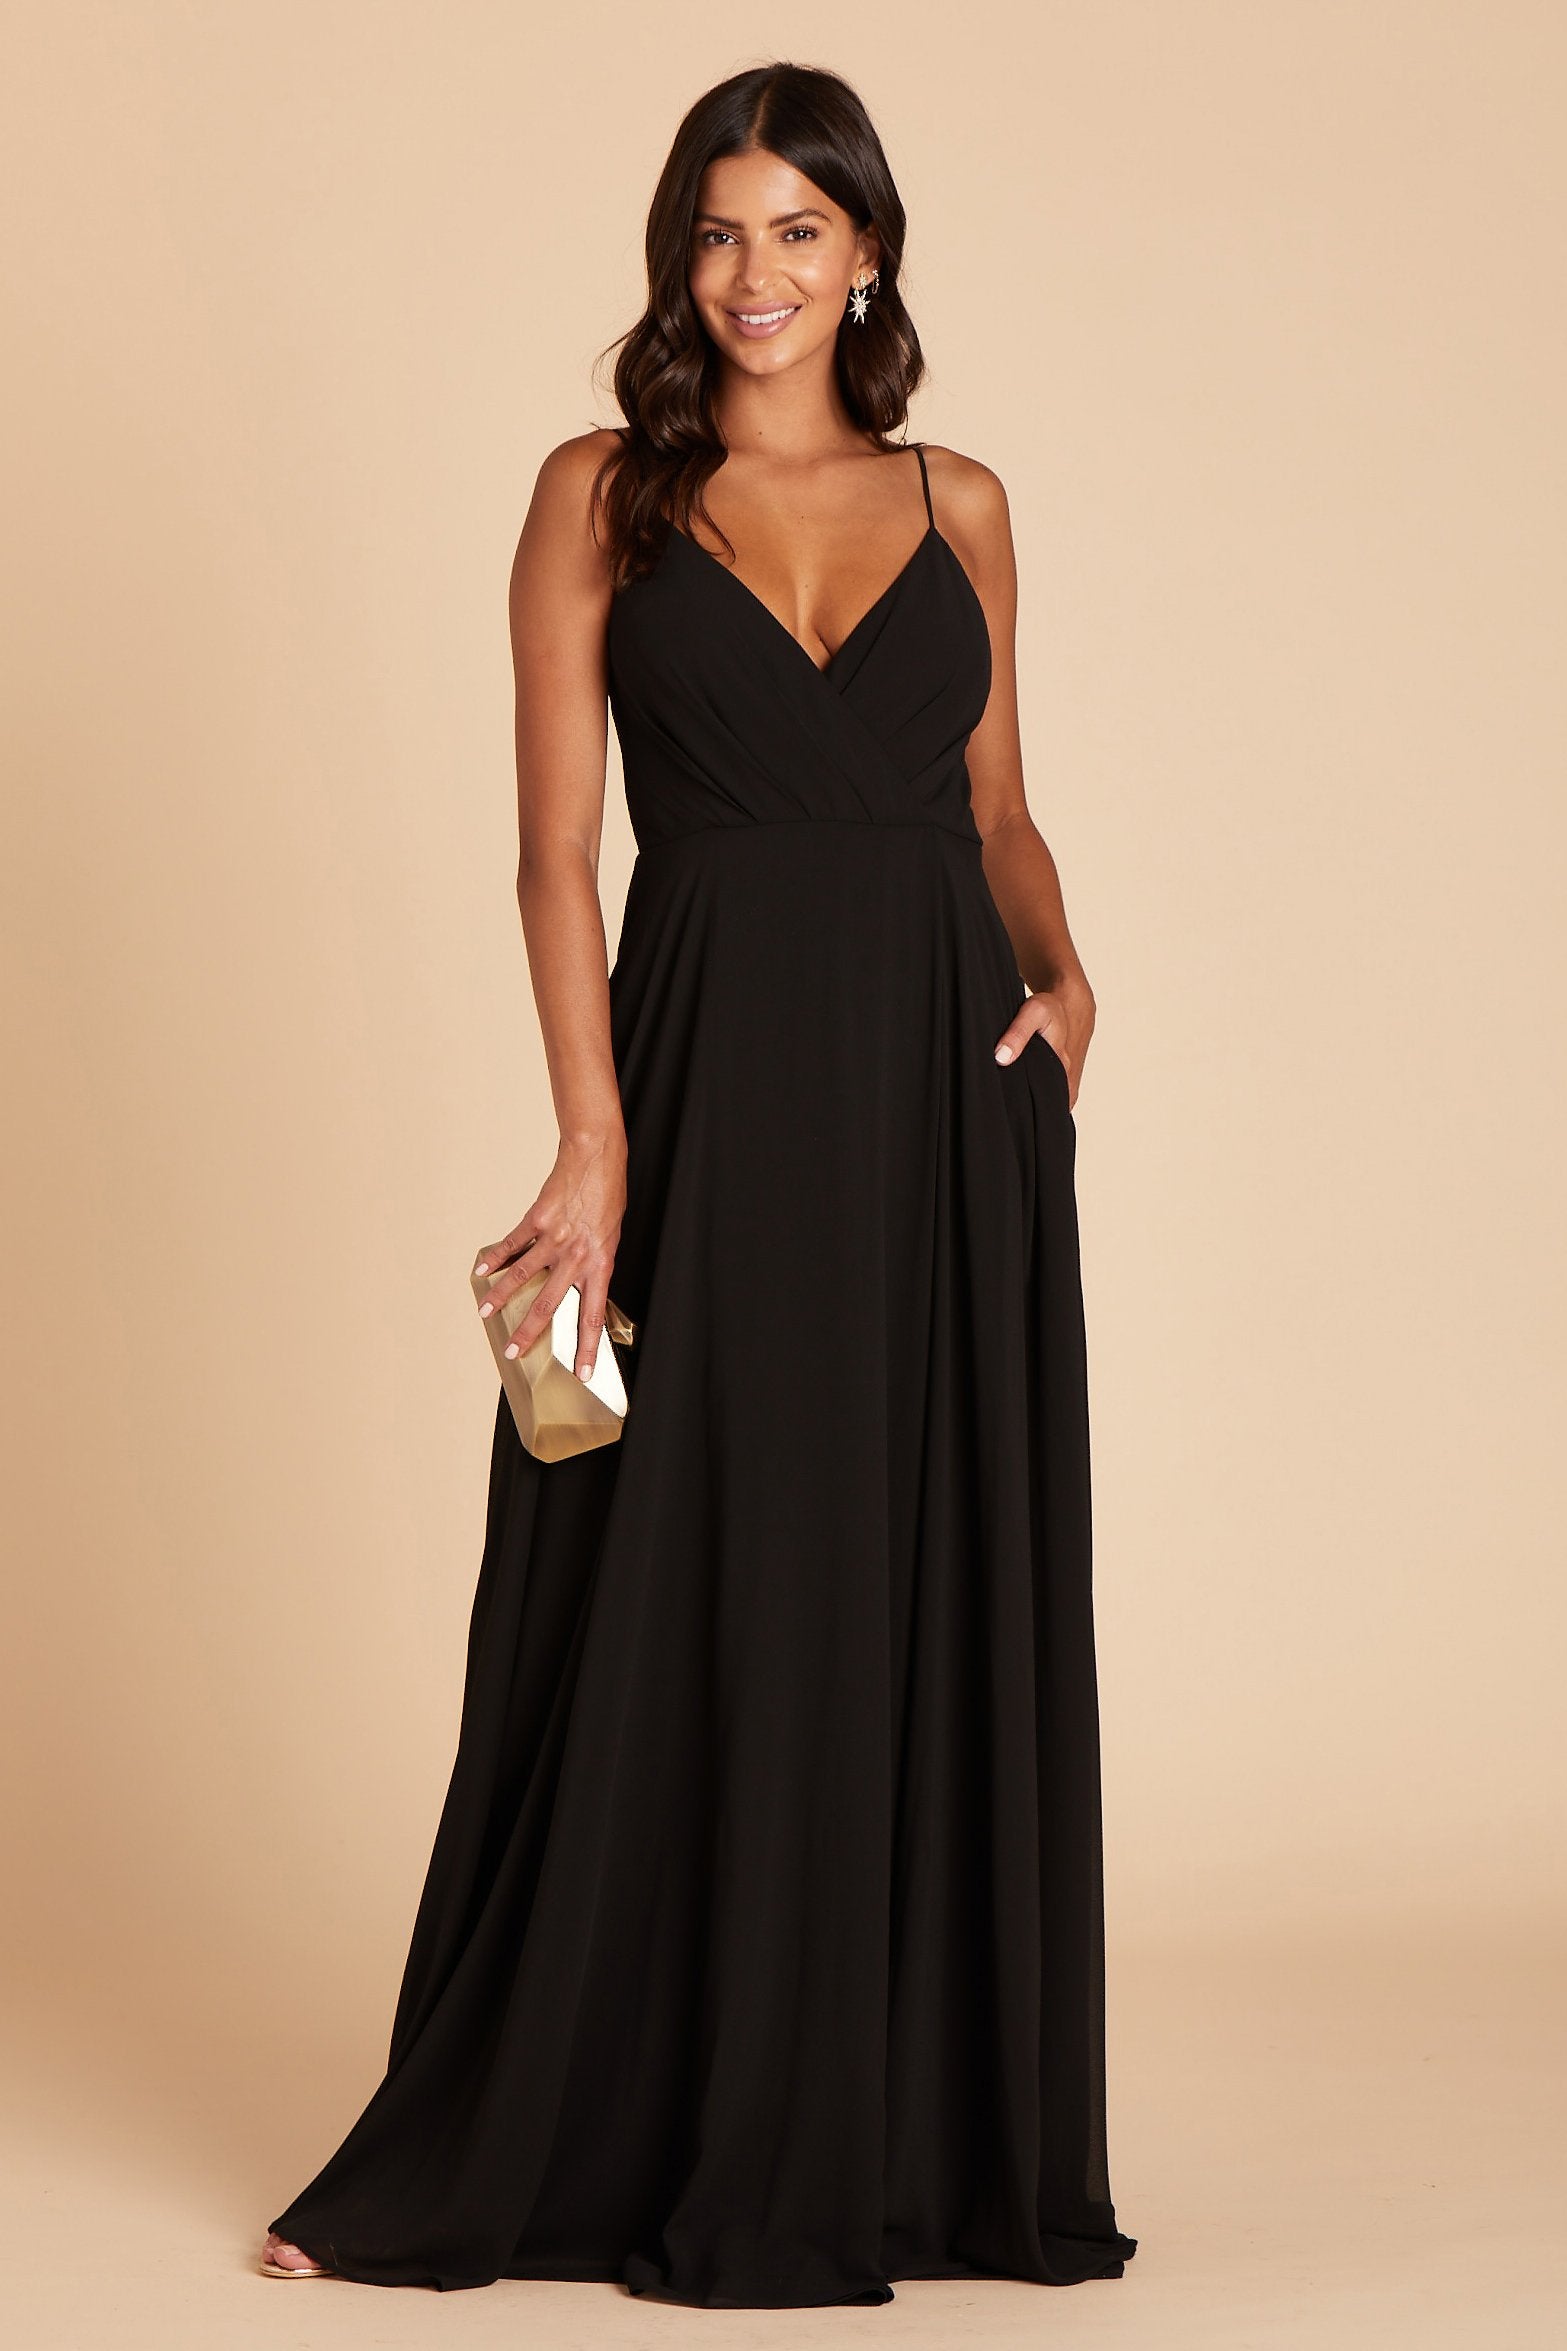 Kaia bridesmaids dress in black chiffon by Birdy Grey, front view with hand in pocket